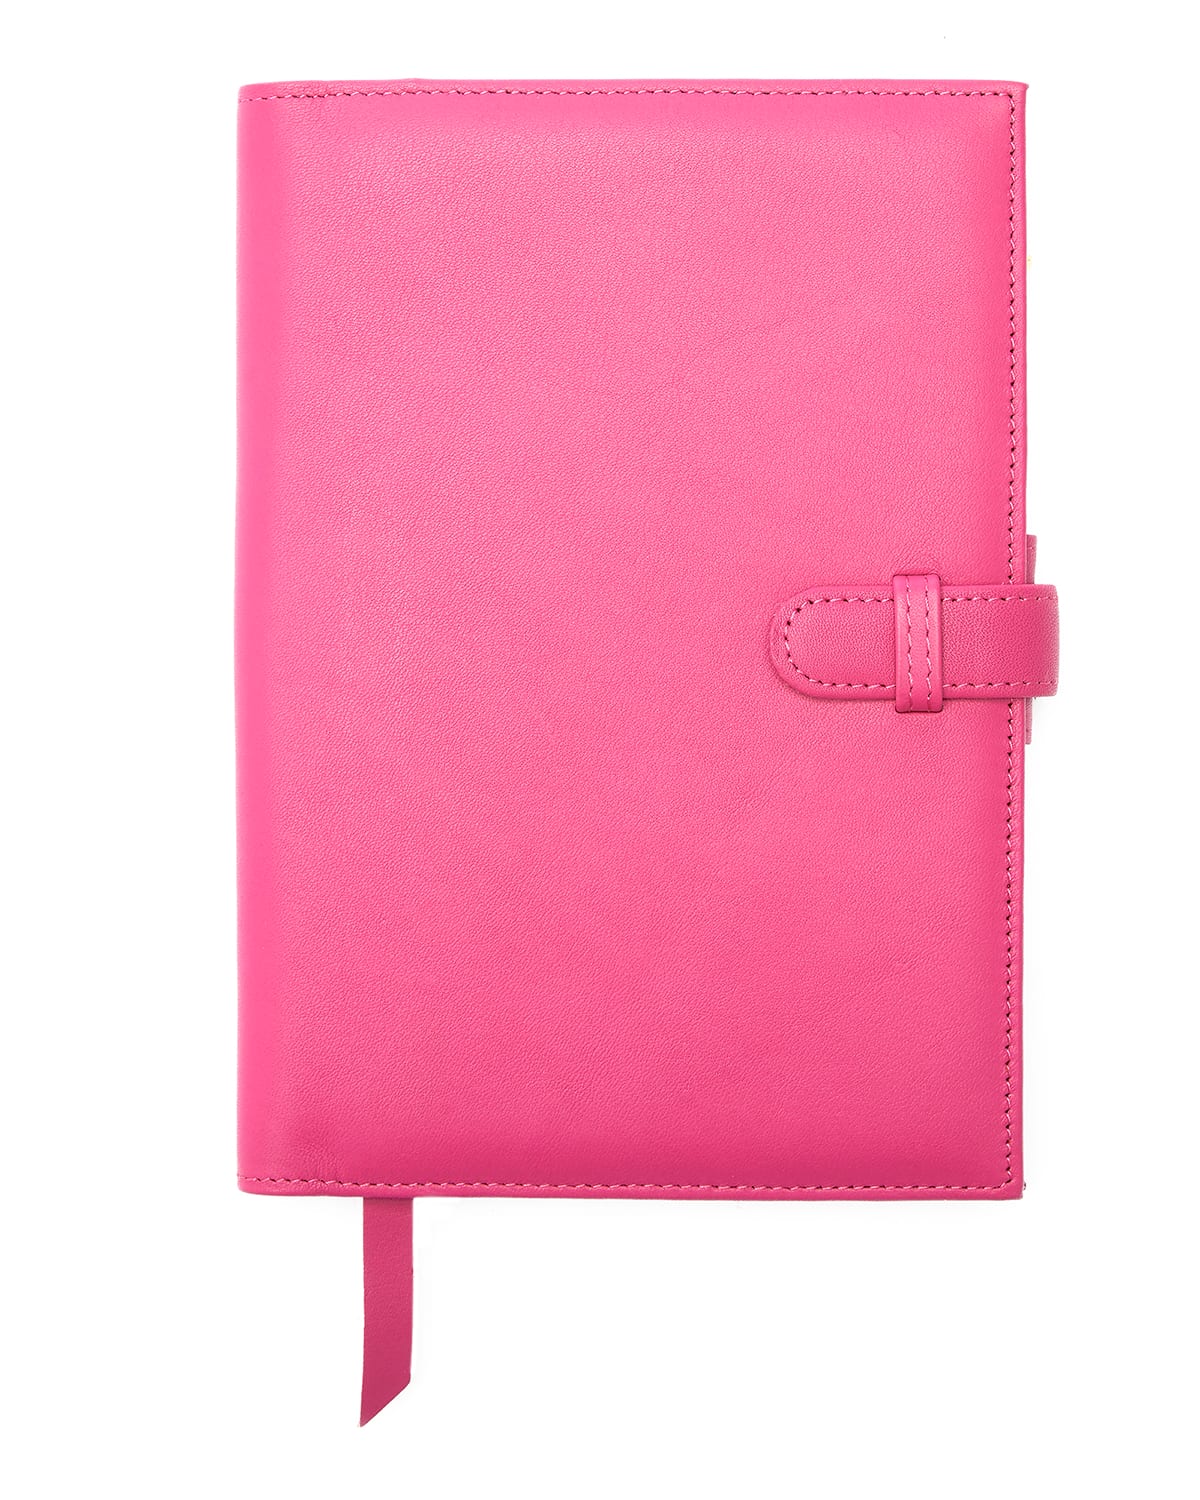 Royce New York Executive Journal In Bright Pink